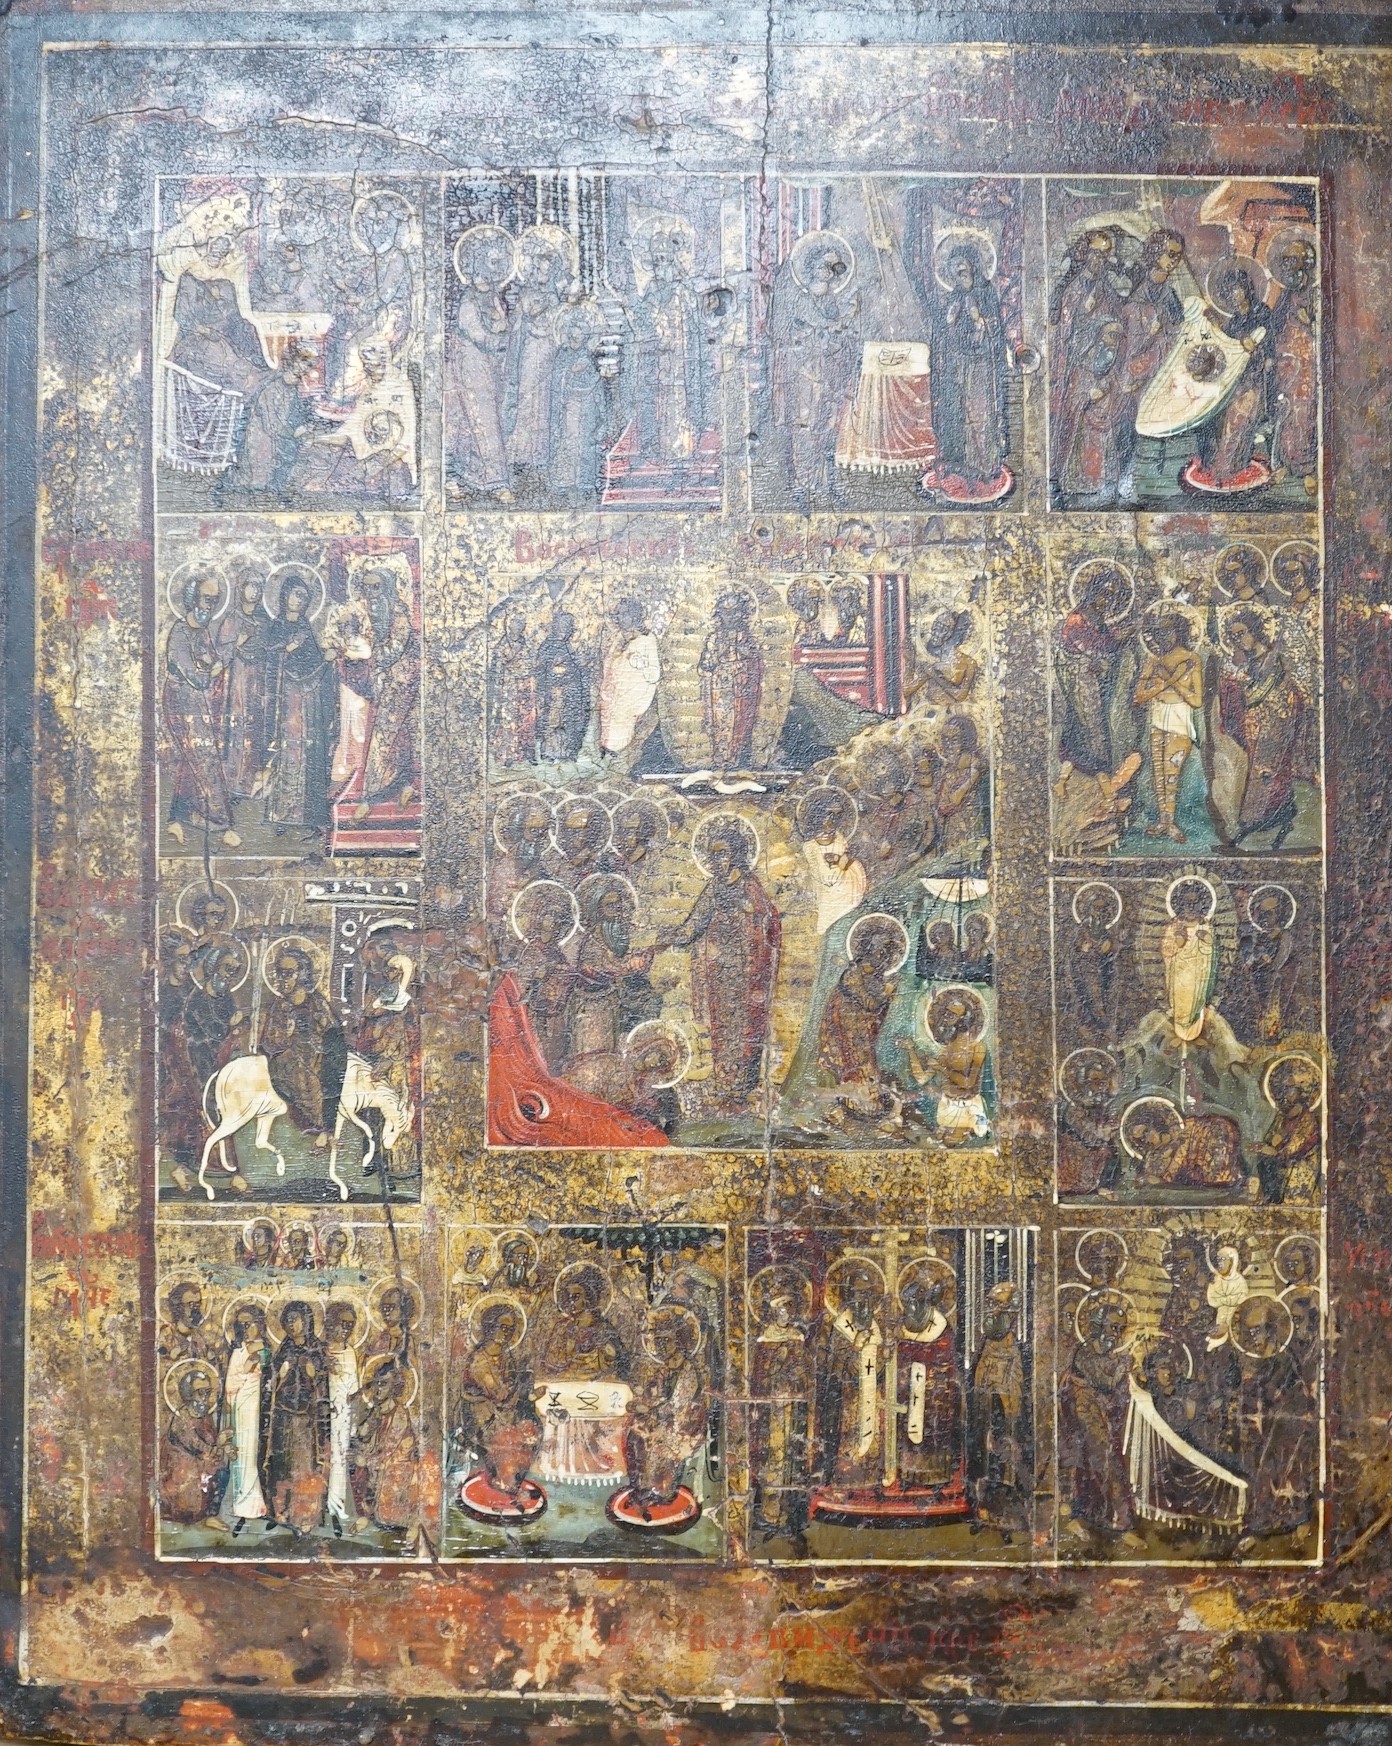 19th century Eastern European School, tempera on wooden panel, Icon with scenes from the Life of Christ, 35 x 30cm